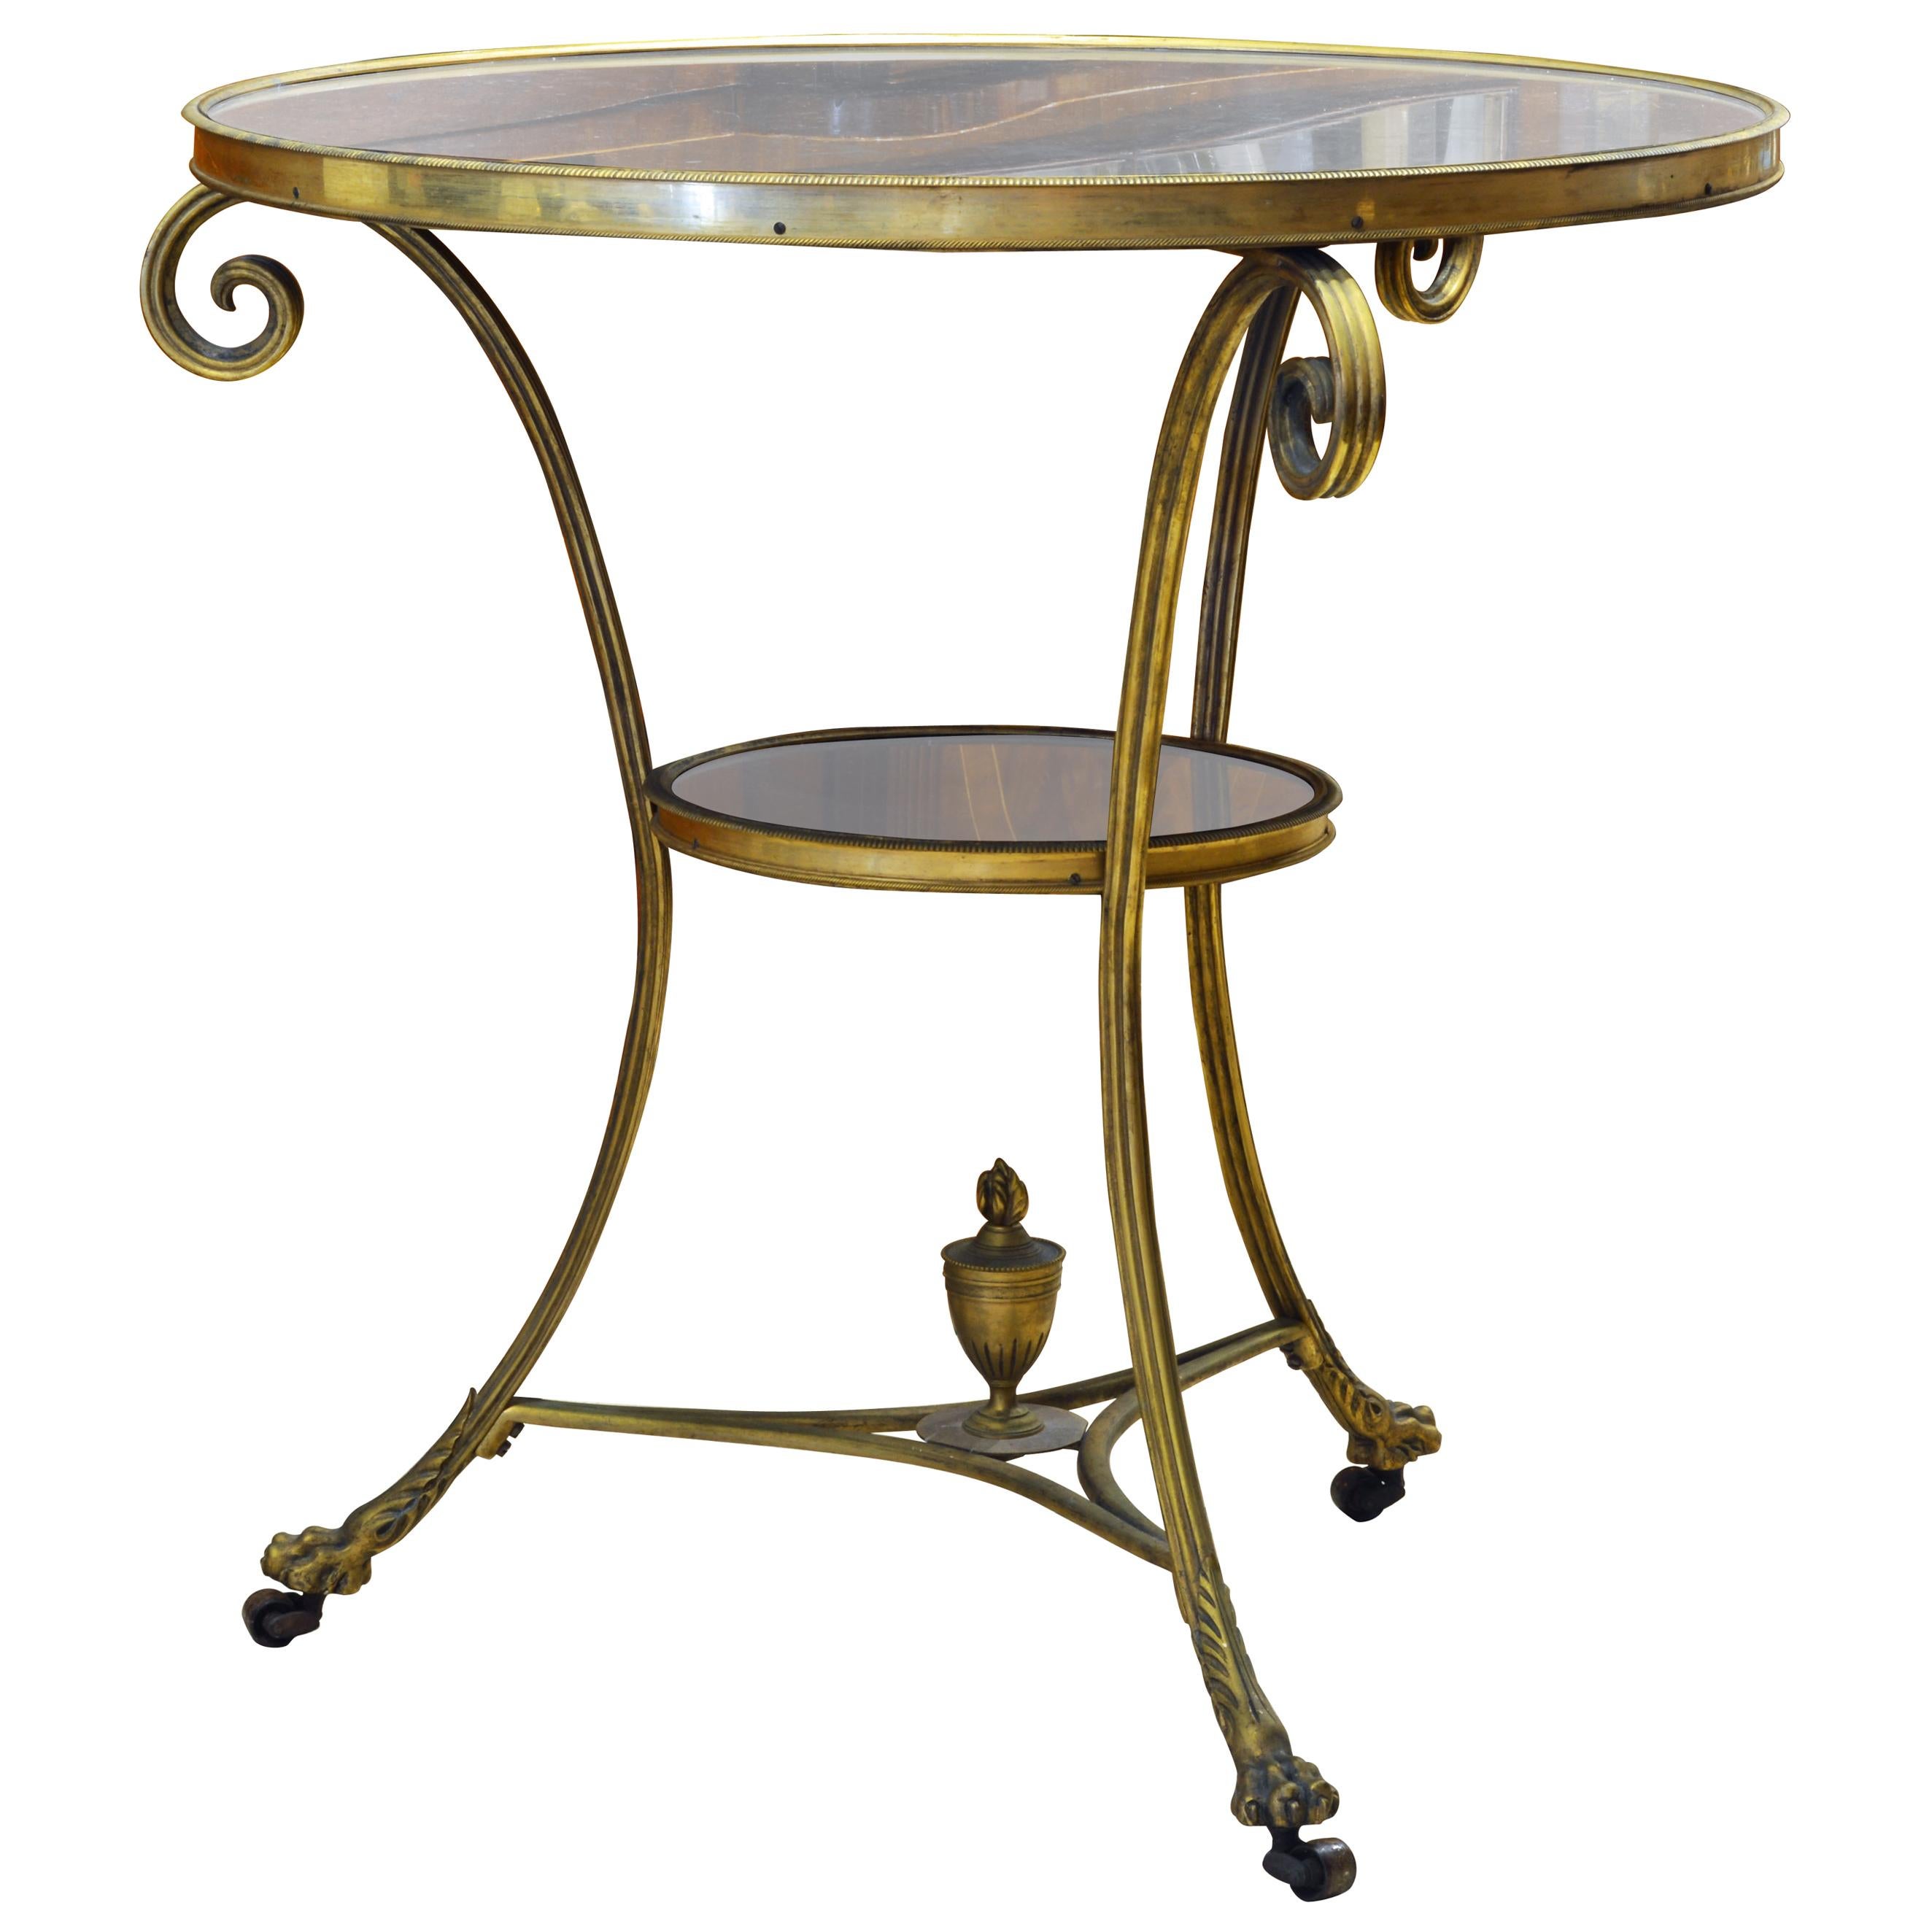 19th Century Excellent French Empire Bronze and Marble Two-Tier Gueridon Table